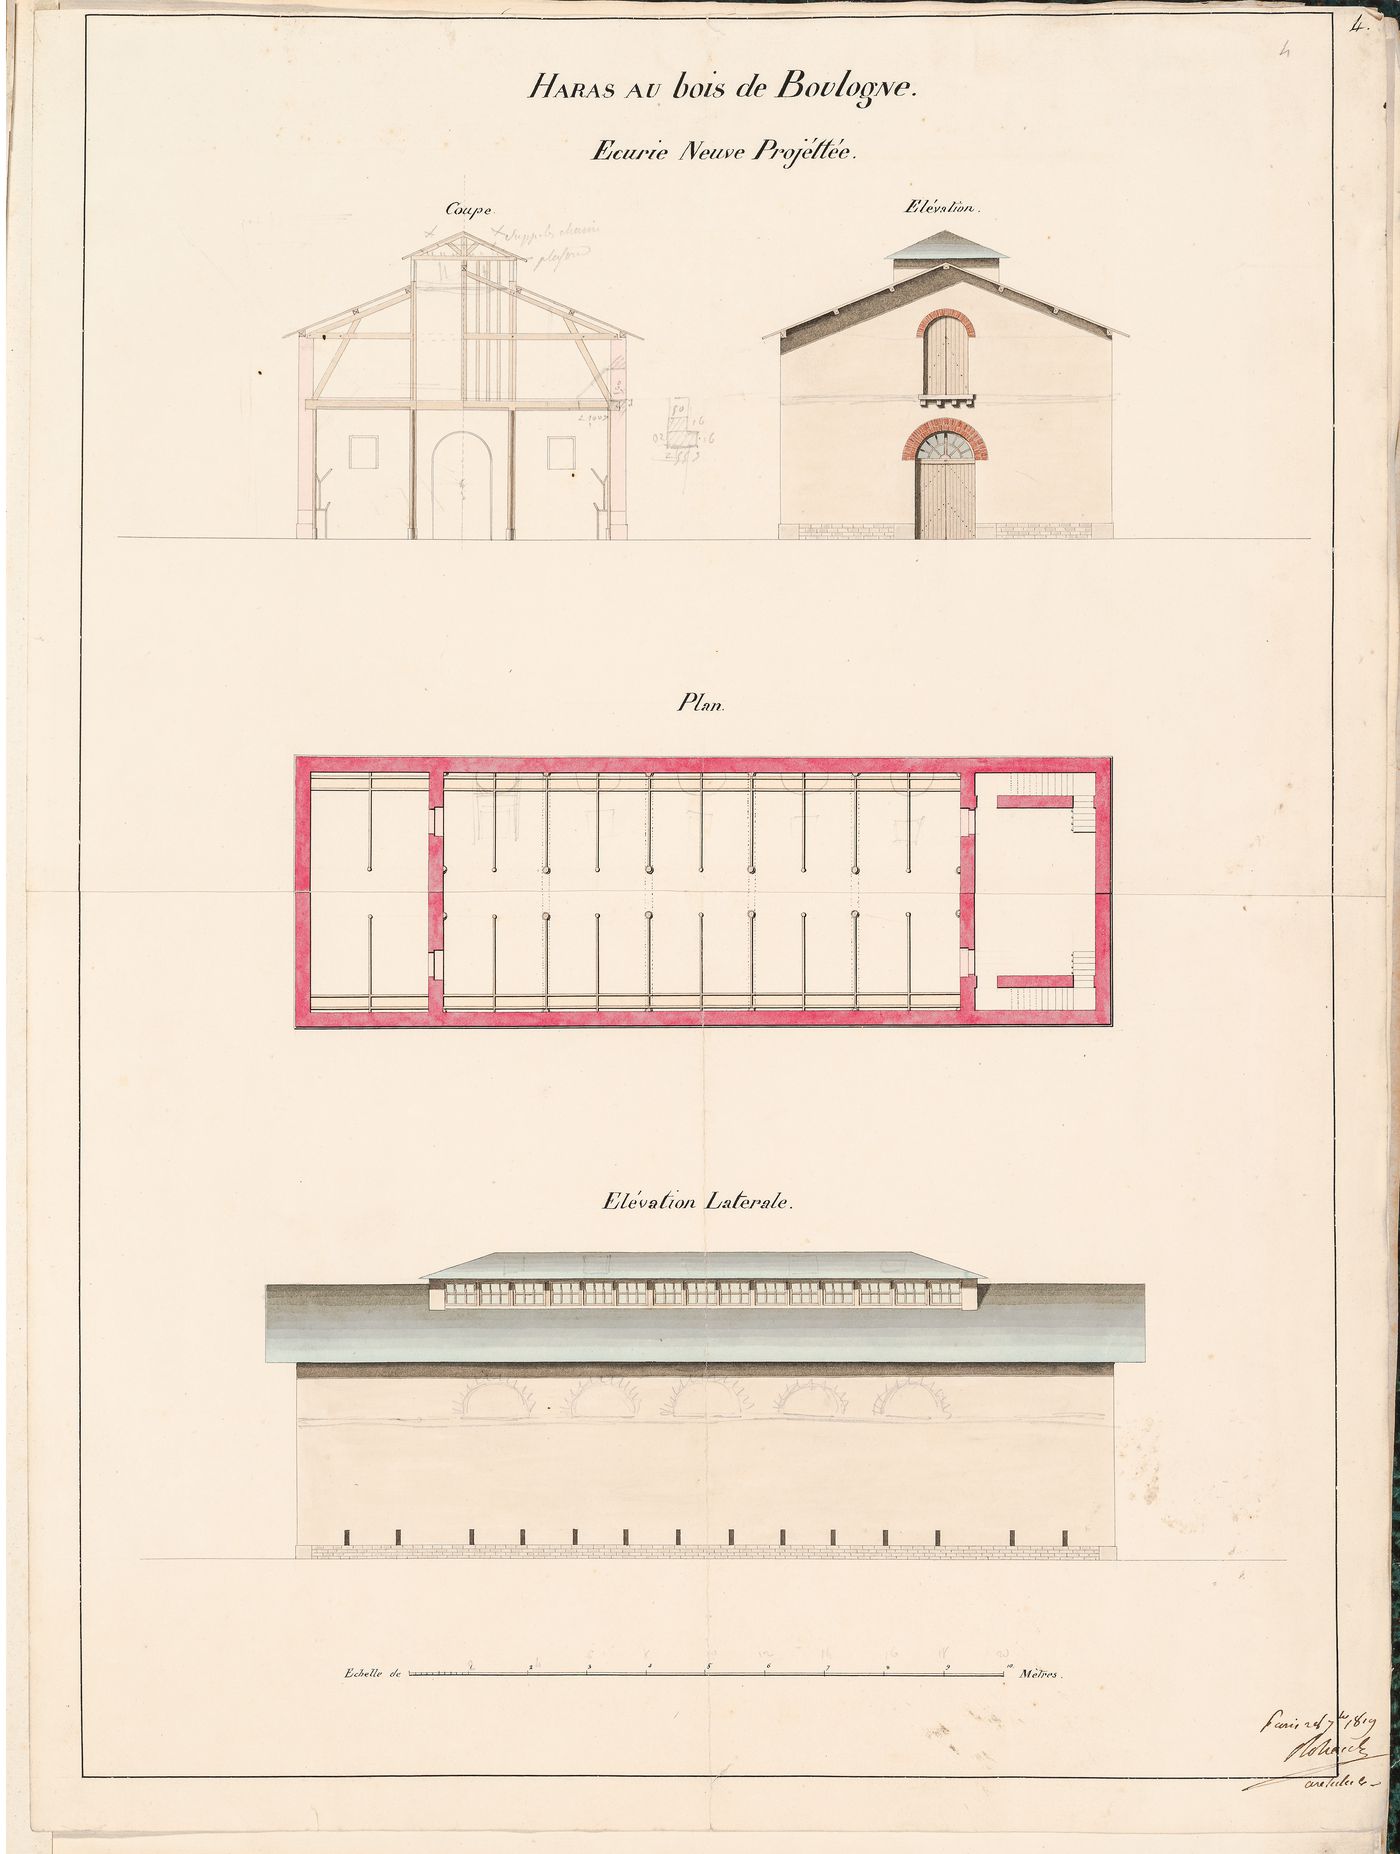 Project for a stud-farm "Haras de Madrid", Bois de Boulogne: Plan, section, and elevations for a stable